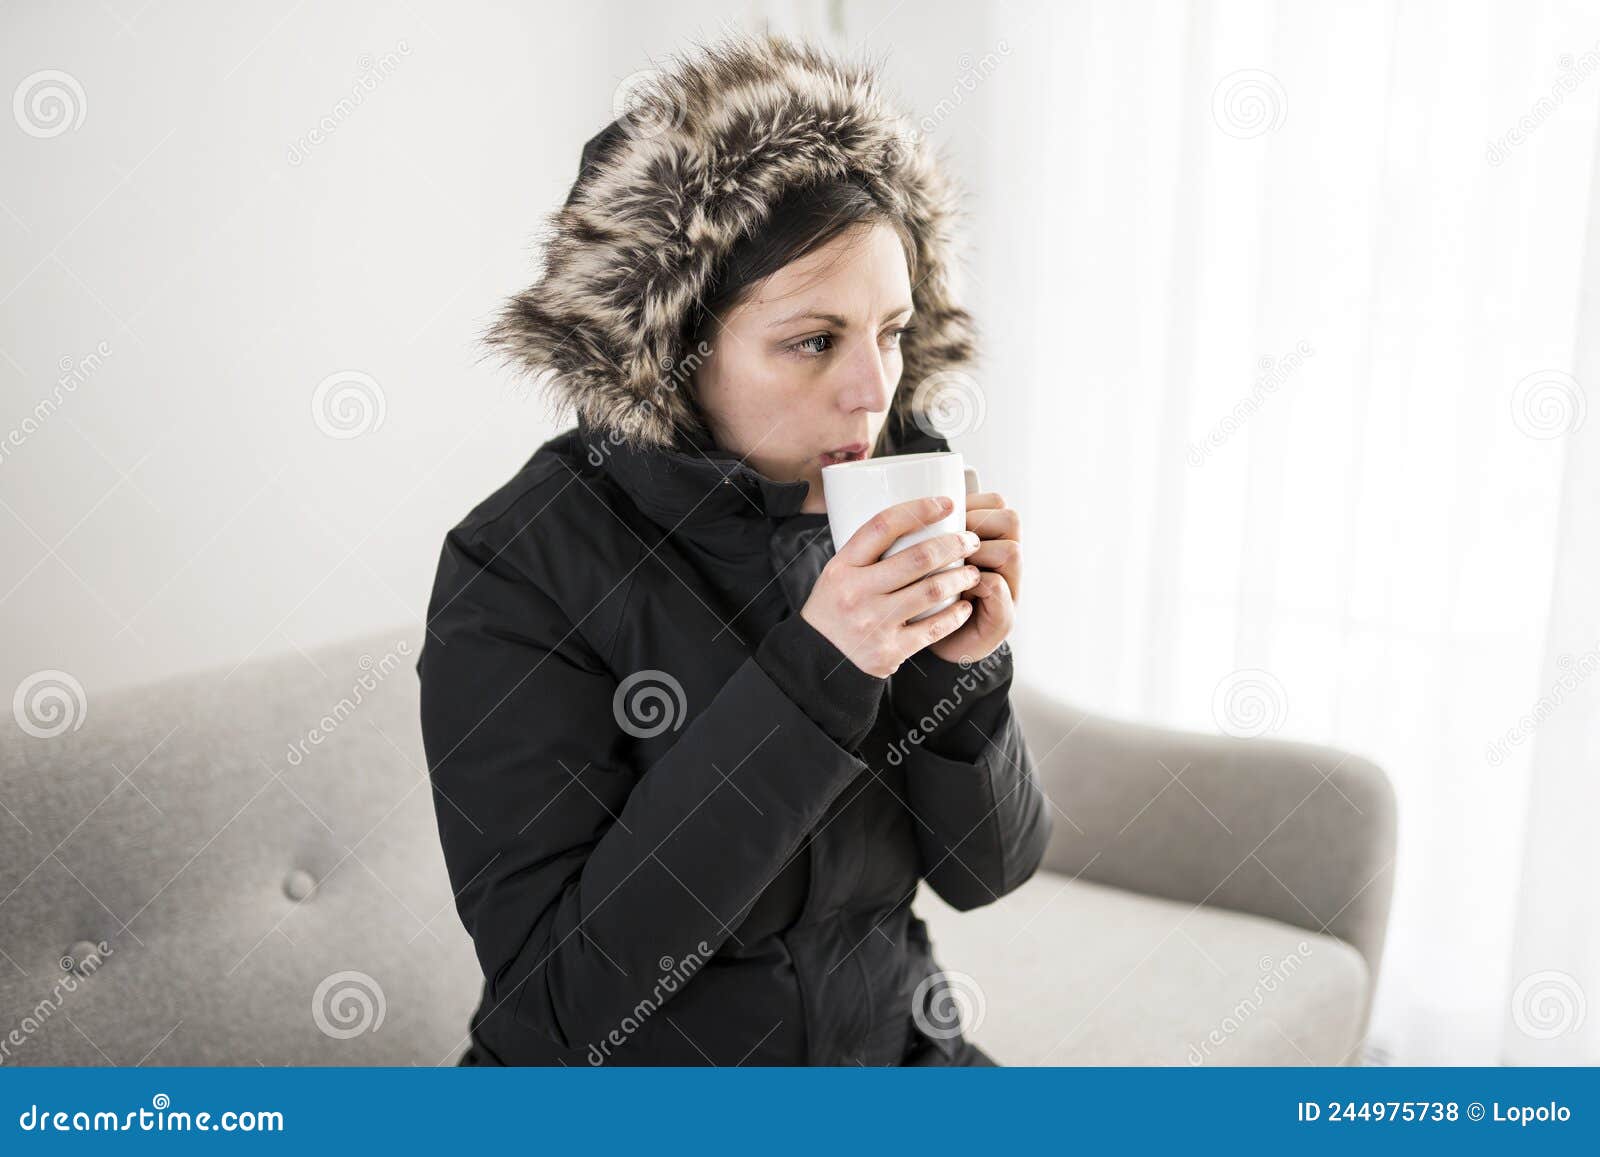 Woman with Coffee and Warm Clothing Feeling the Cold Inside House on ...